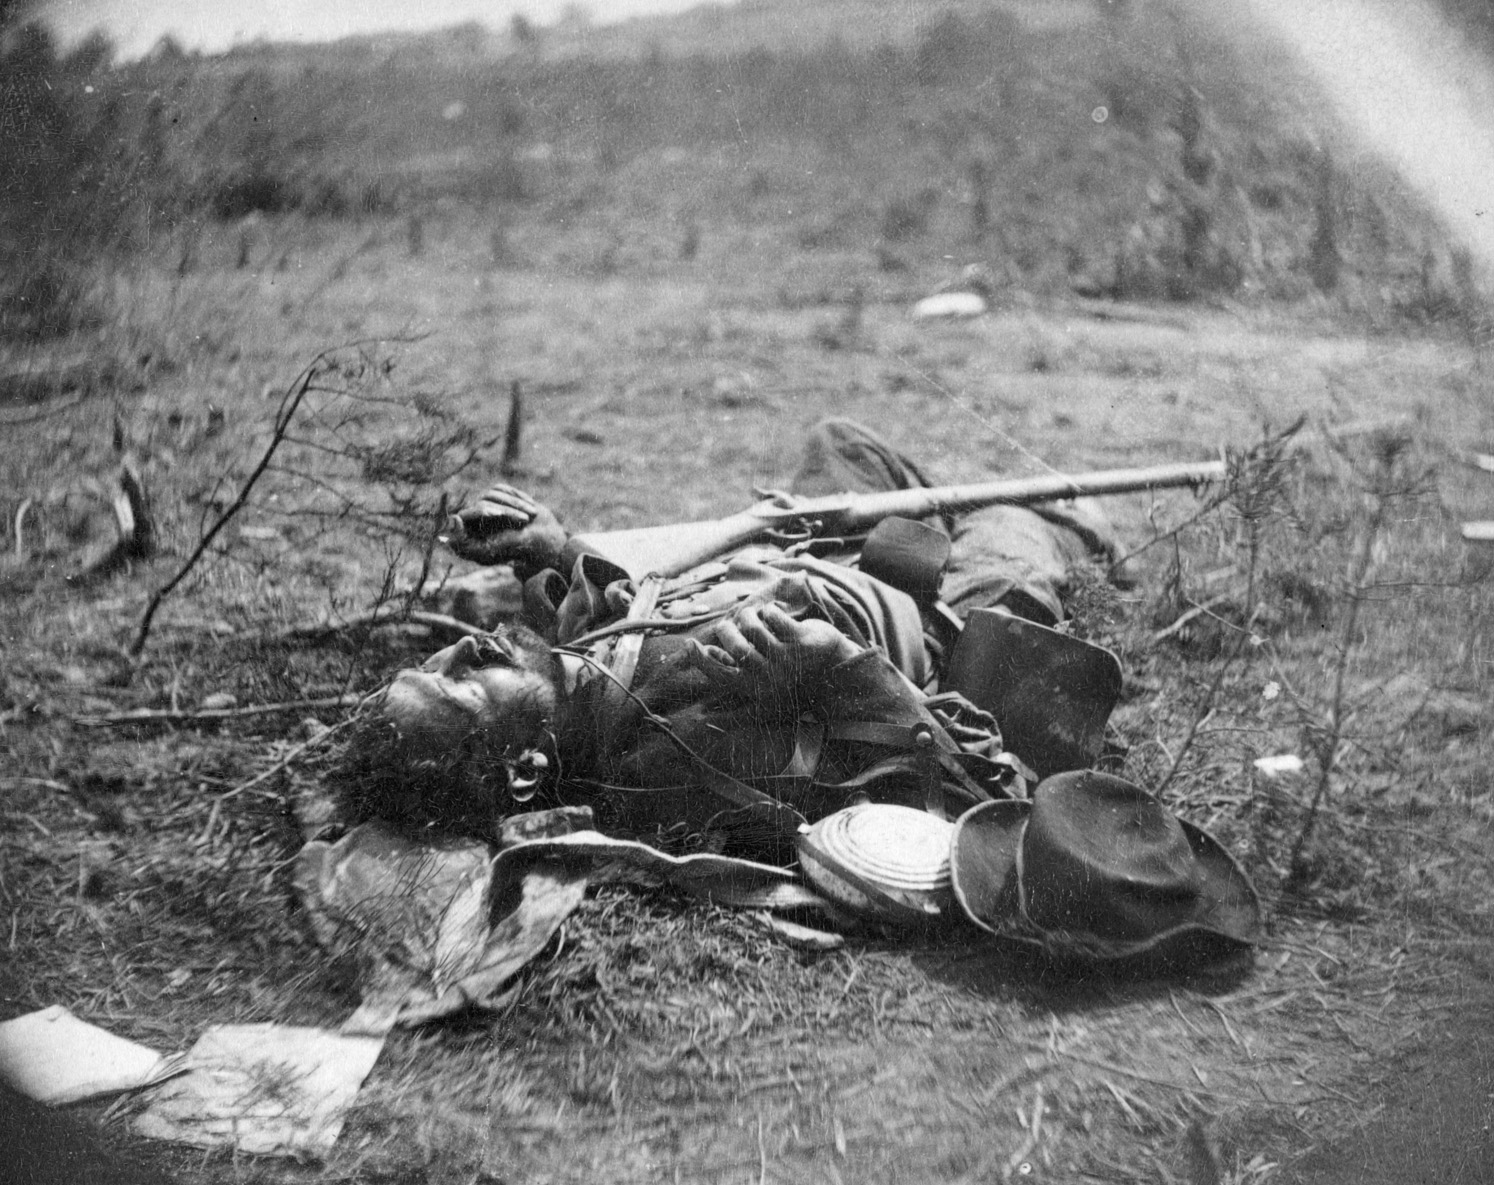 The Battle of Spotsylvania Court House saw some of the most brutal and desperate fighting of the war. The harvest of death was terrible, as shown by this photograph of a lifeless Confederate soldier behind a breastwork at the Widow Alsop Farm.